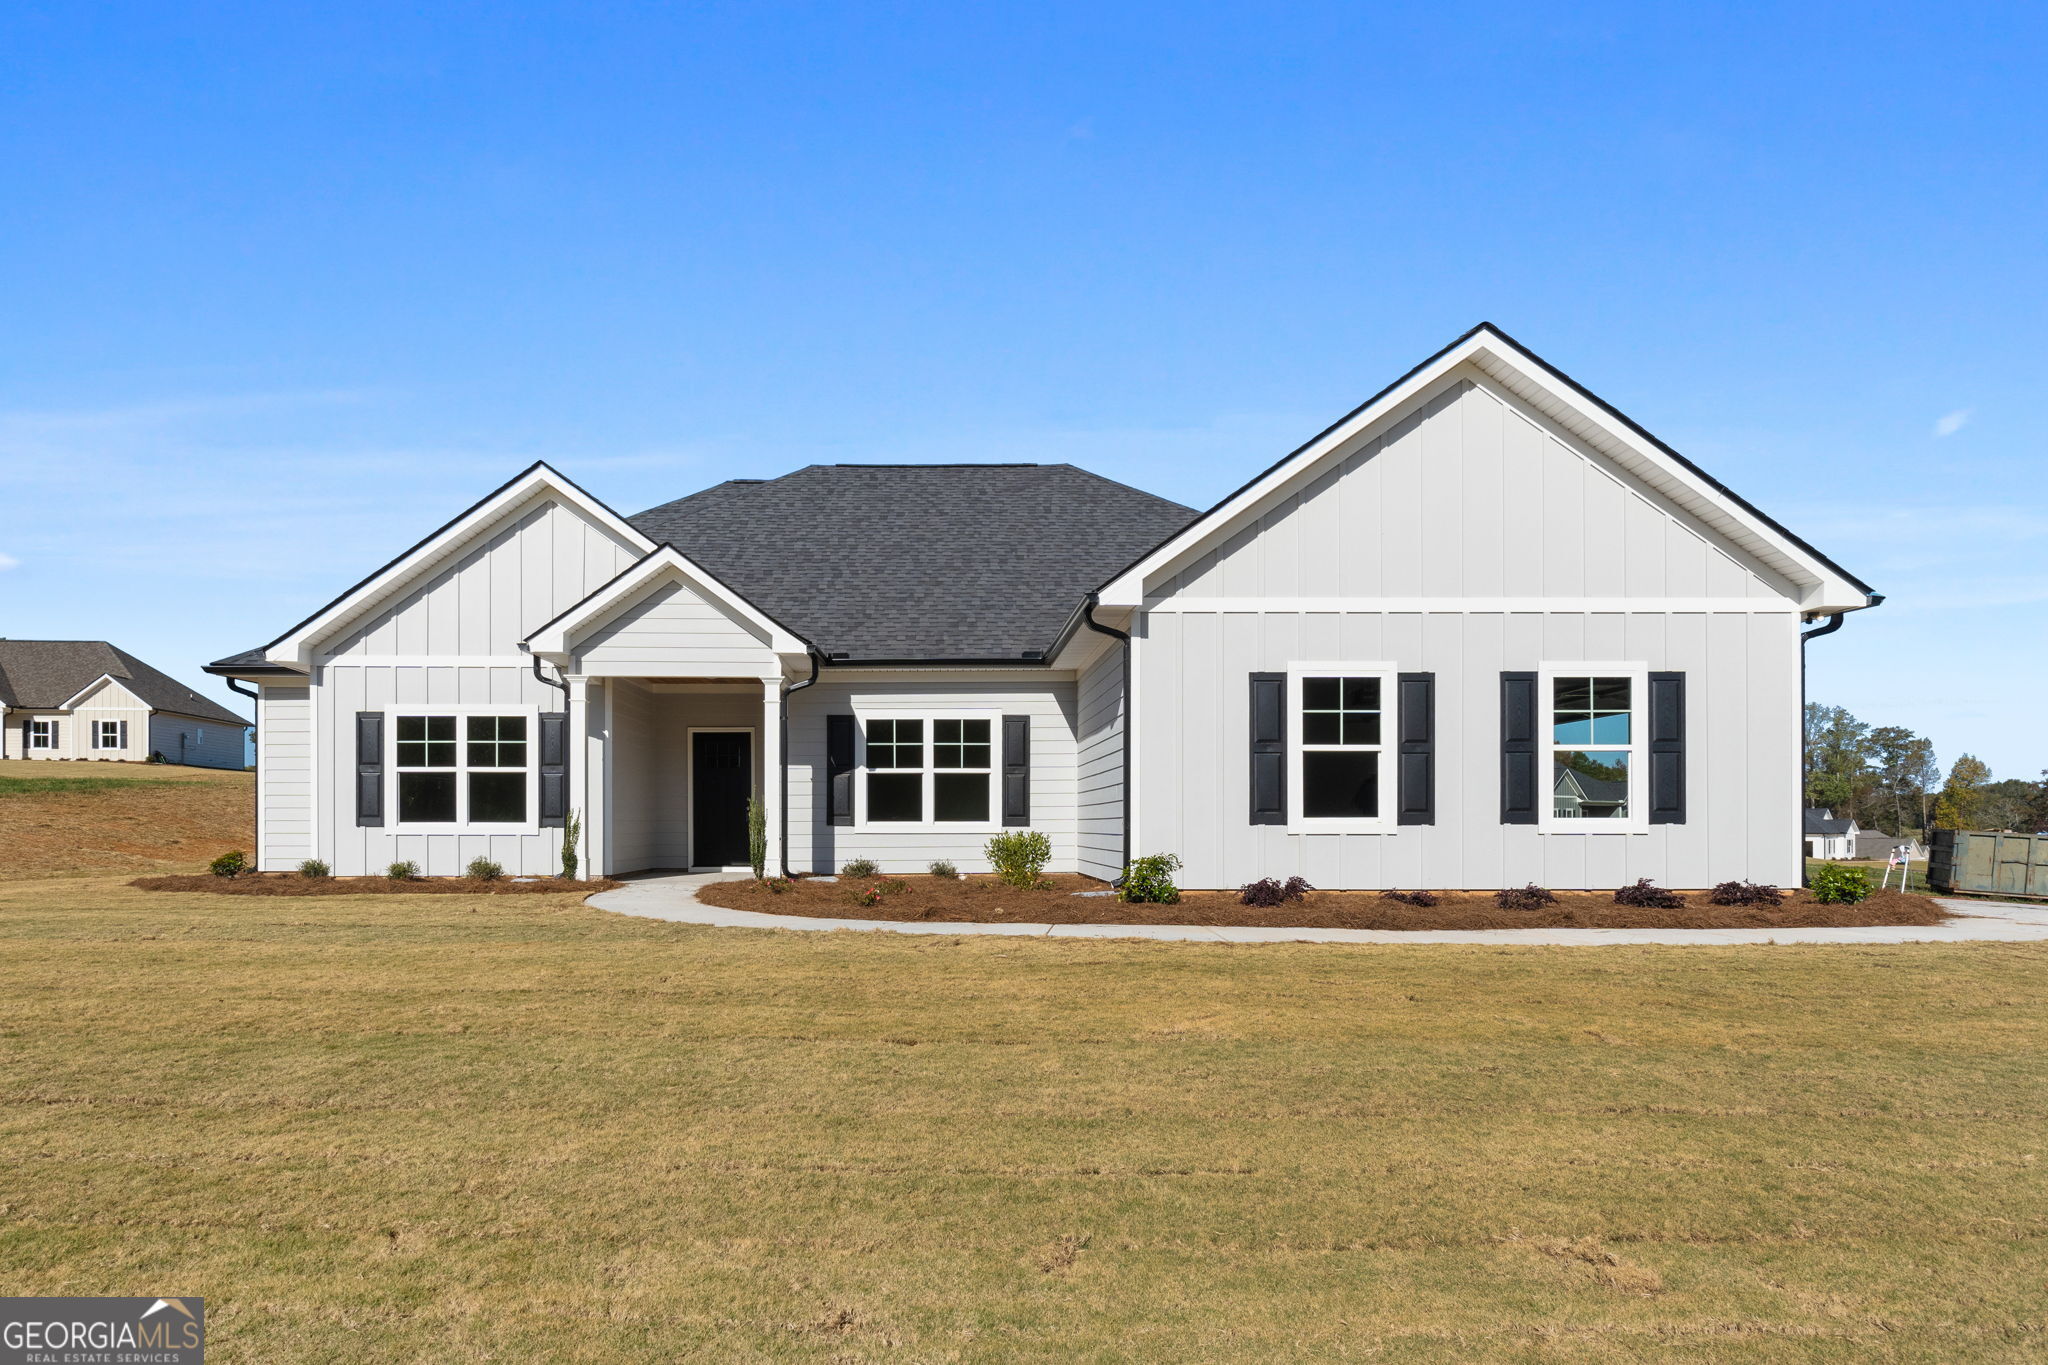 540 Adams Road Meansville, GA 30256 – Pike County New Construction